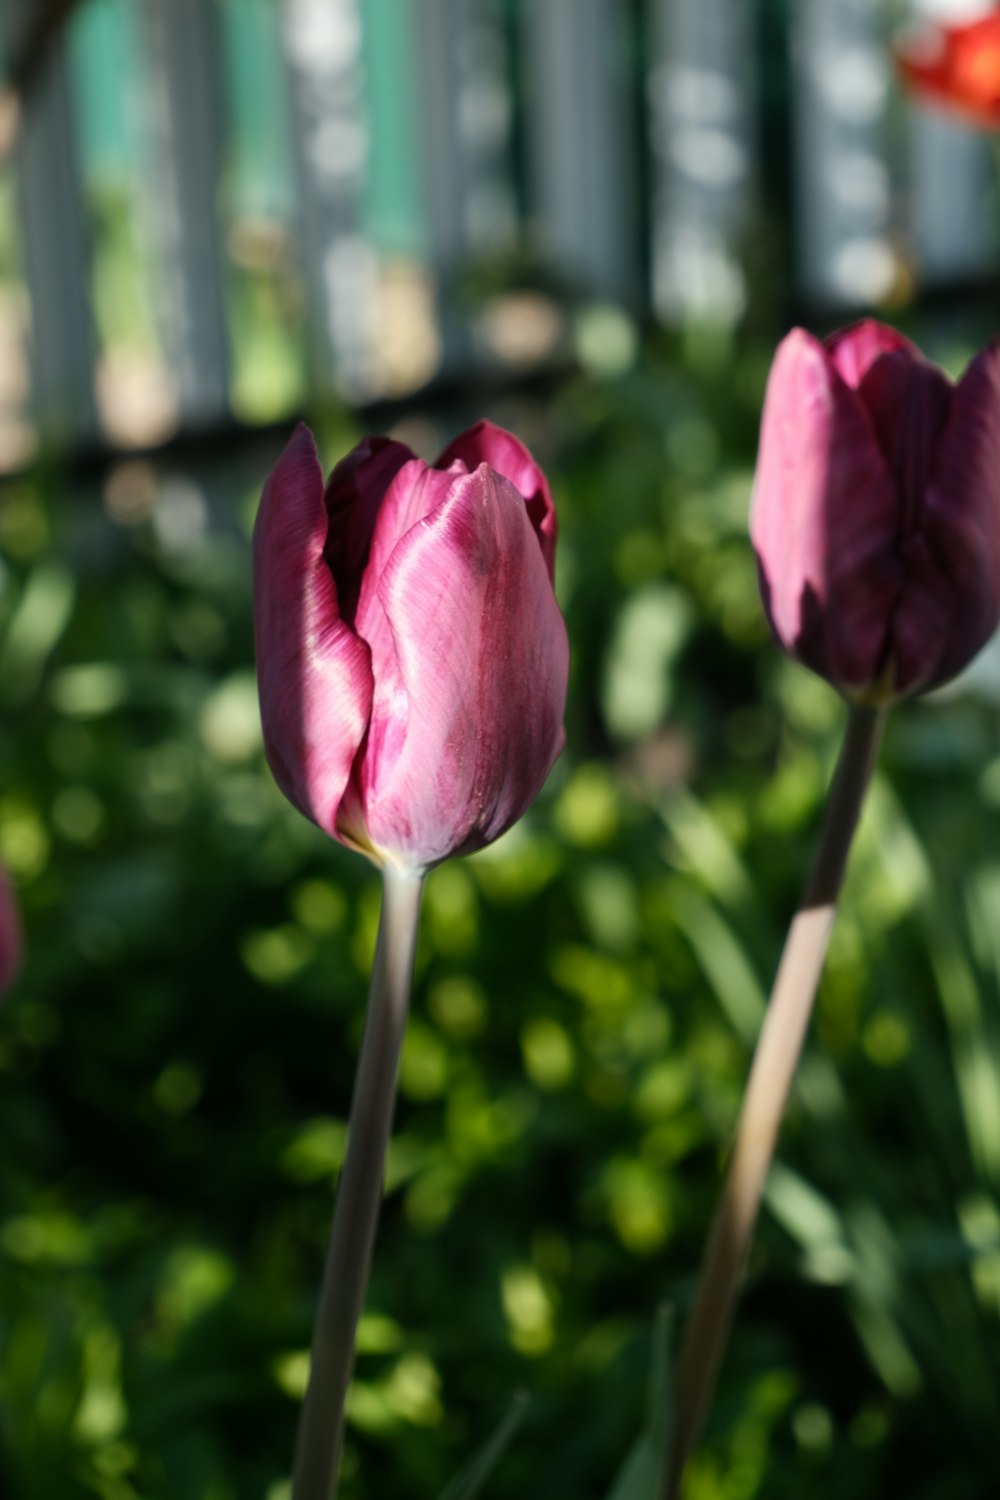 two pink tulips in a garden with a fence in the background